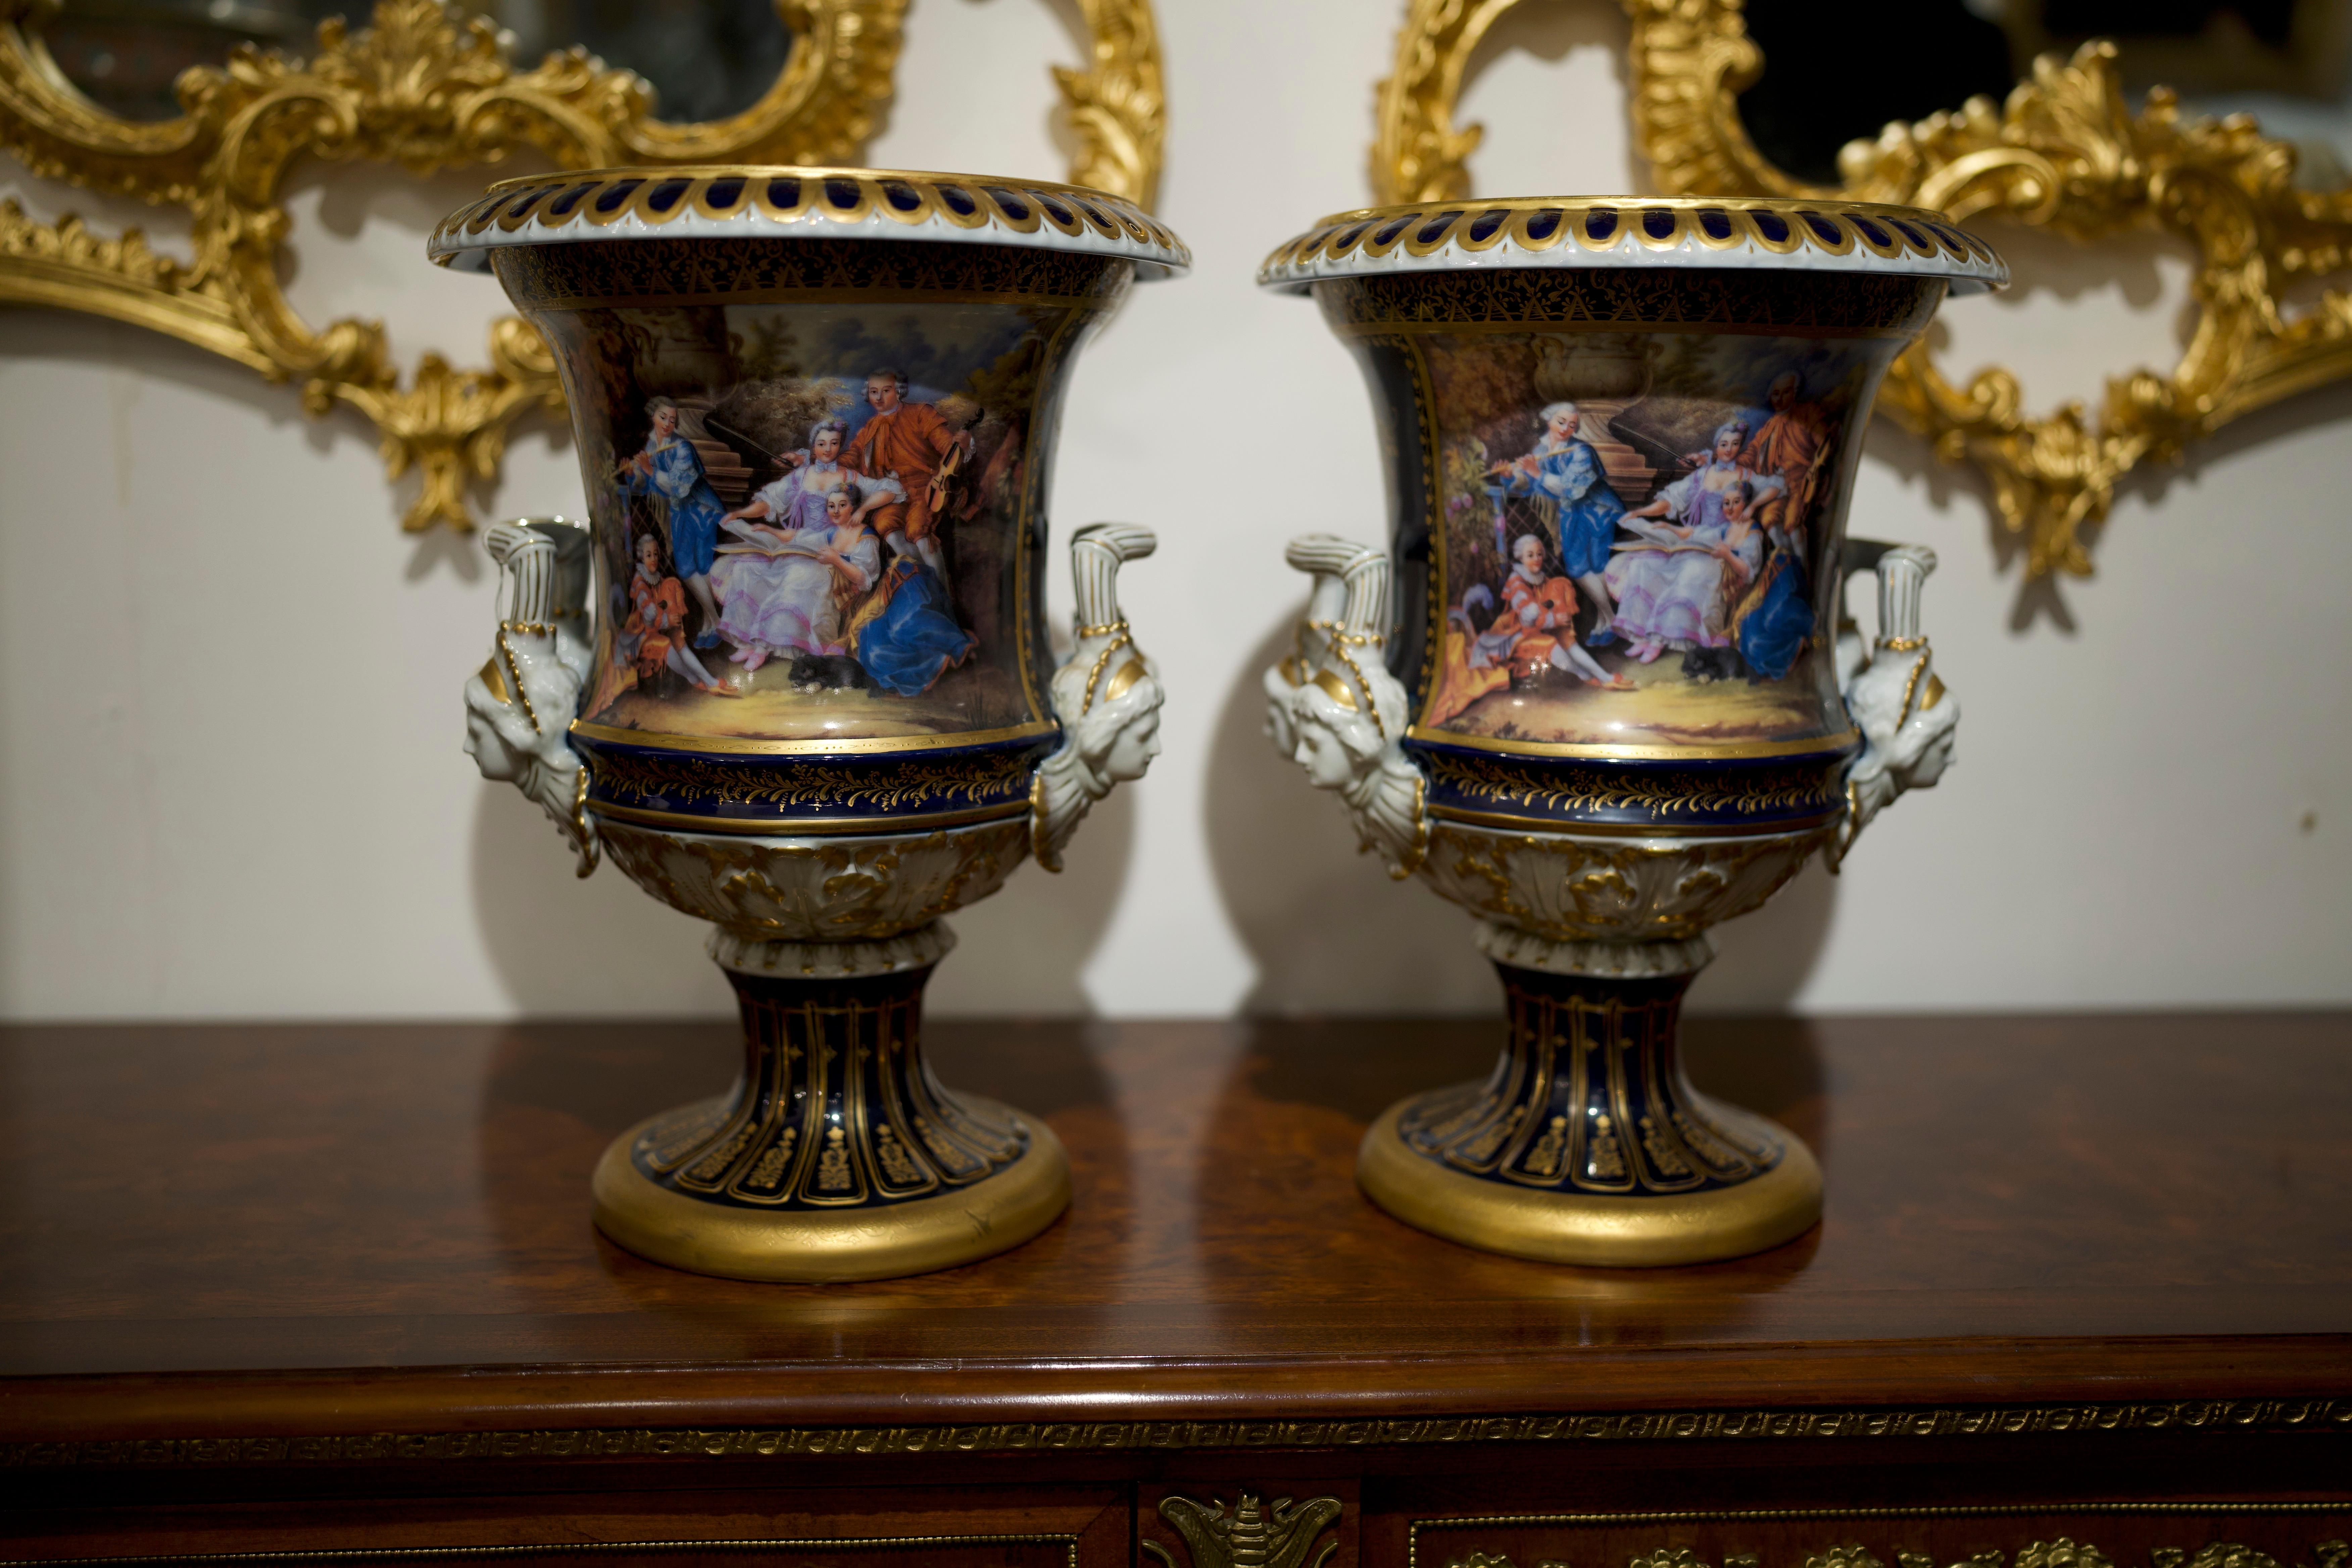 A very attractive pair of 19th century Royal Vienna porcelain urns. The Royal navy blue body highlights the wonderful hand painted cartouches on each side. Each depicting scenes of lovers boarded with beautifully gilded foliate details. This pair